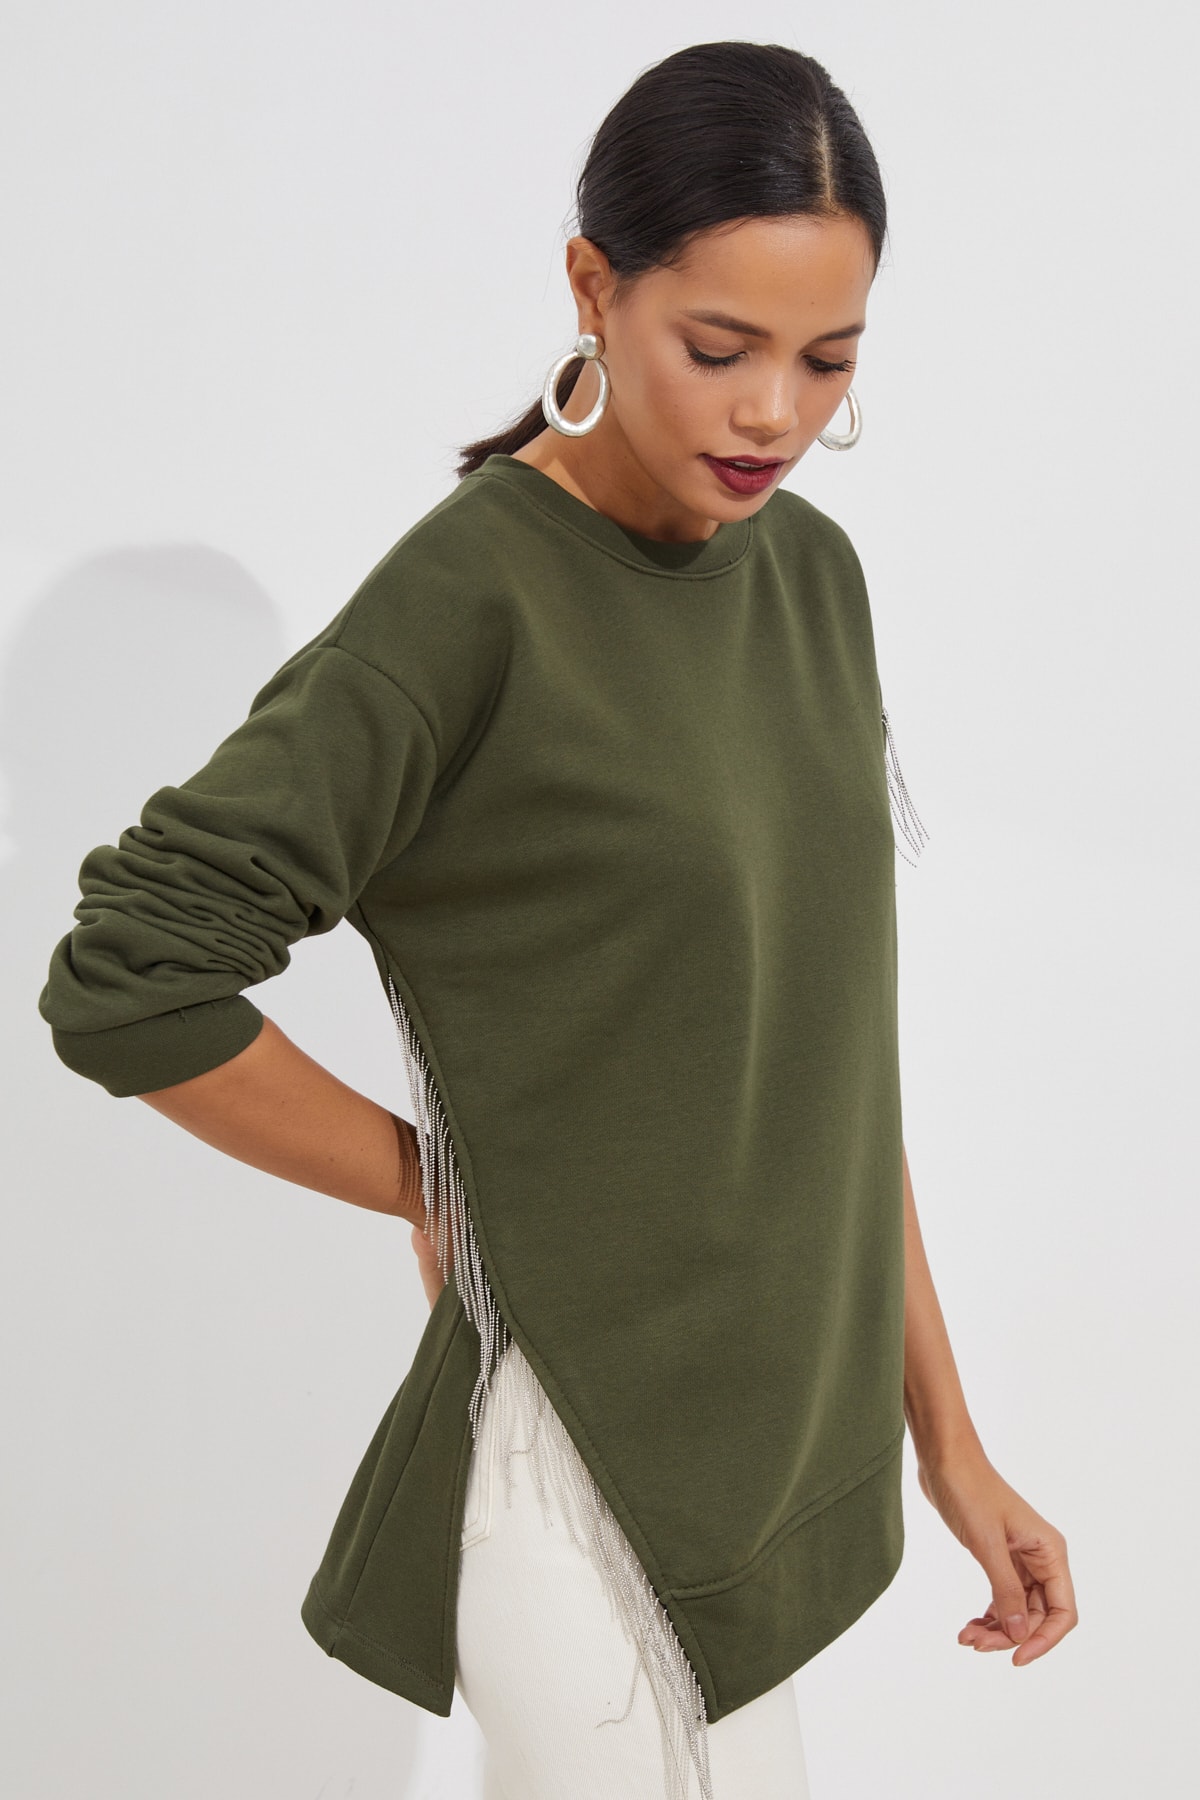 Cool & Sexy Sweatshirt Khaki Relaxed Fit